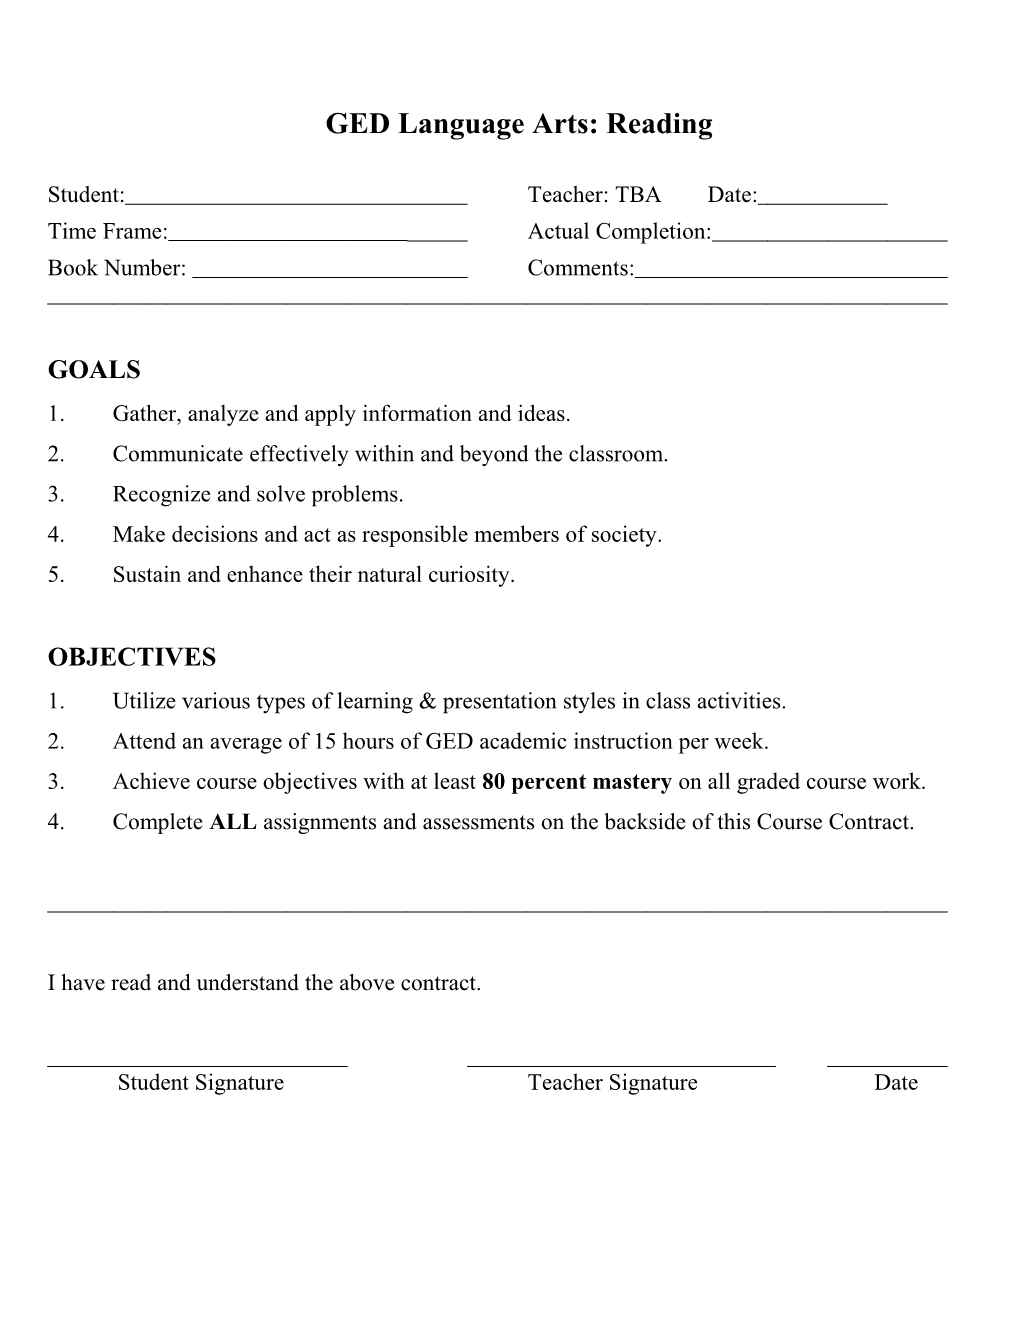 500903 Life Science Part 1 Contract